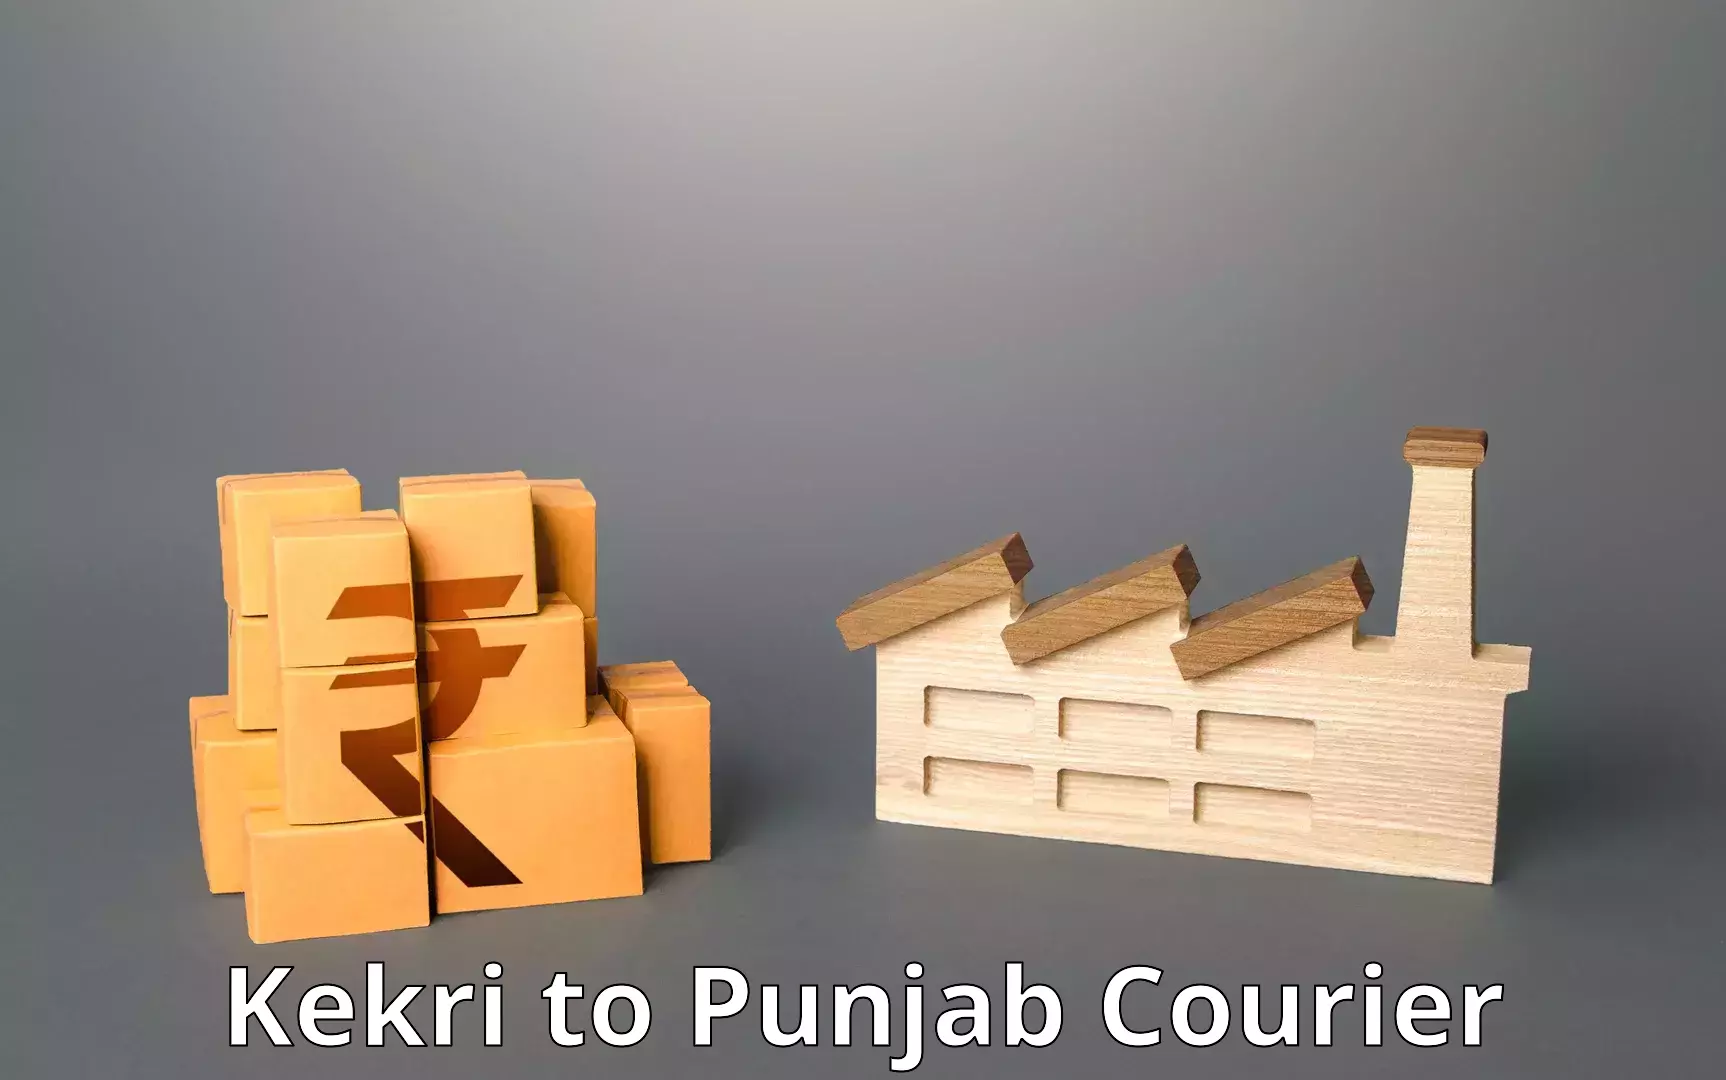 Tailored freight services in Kekri to Punjab